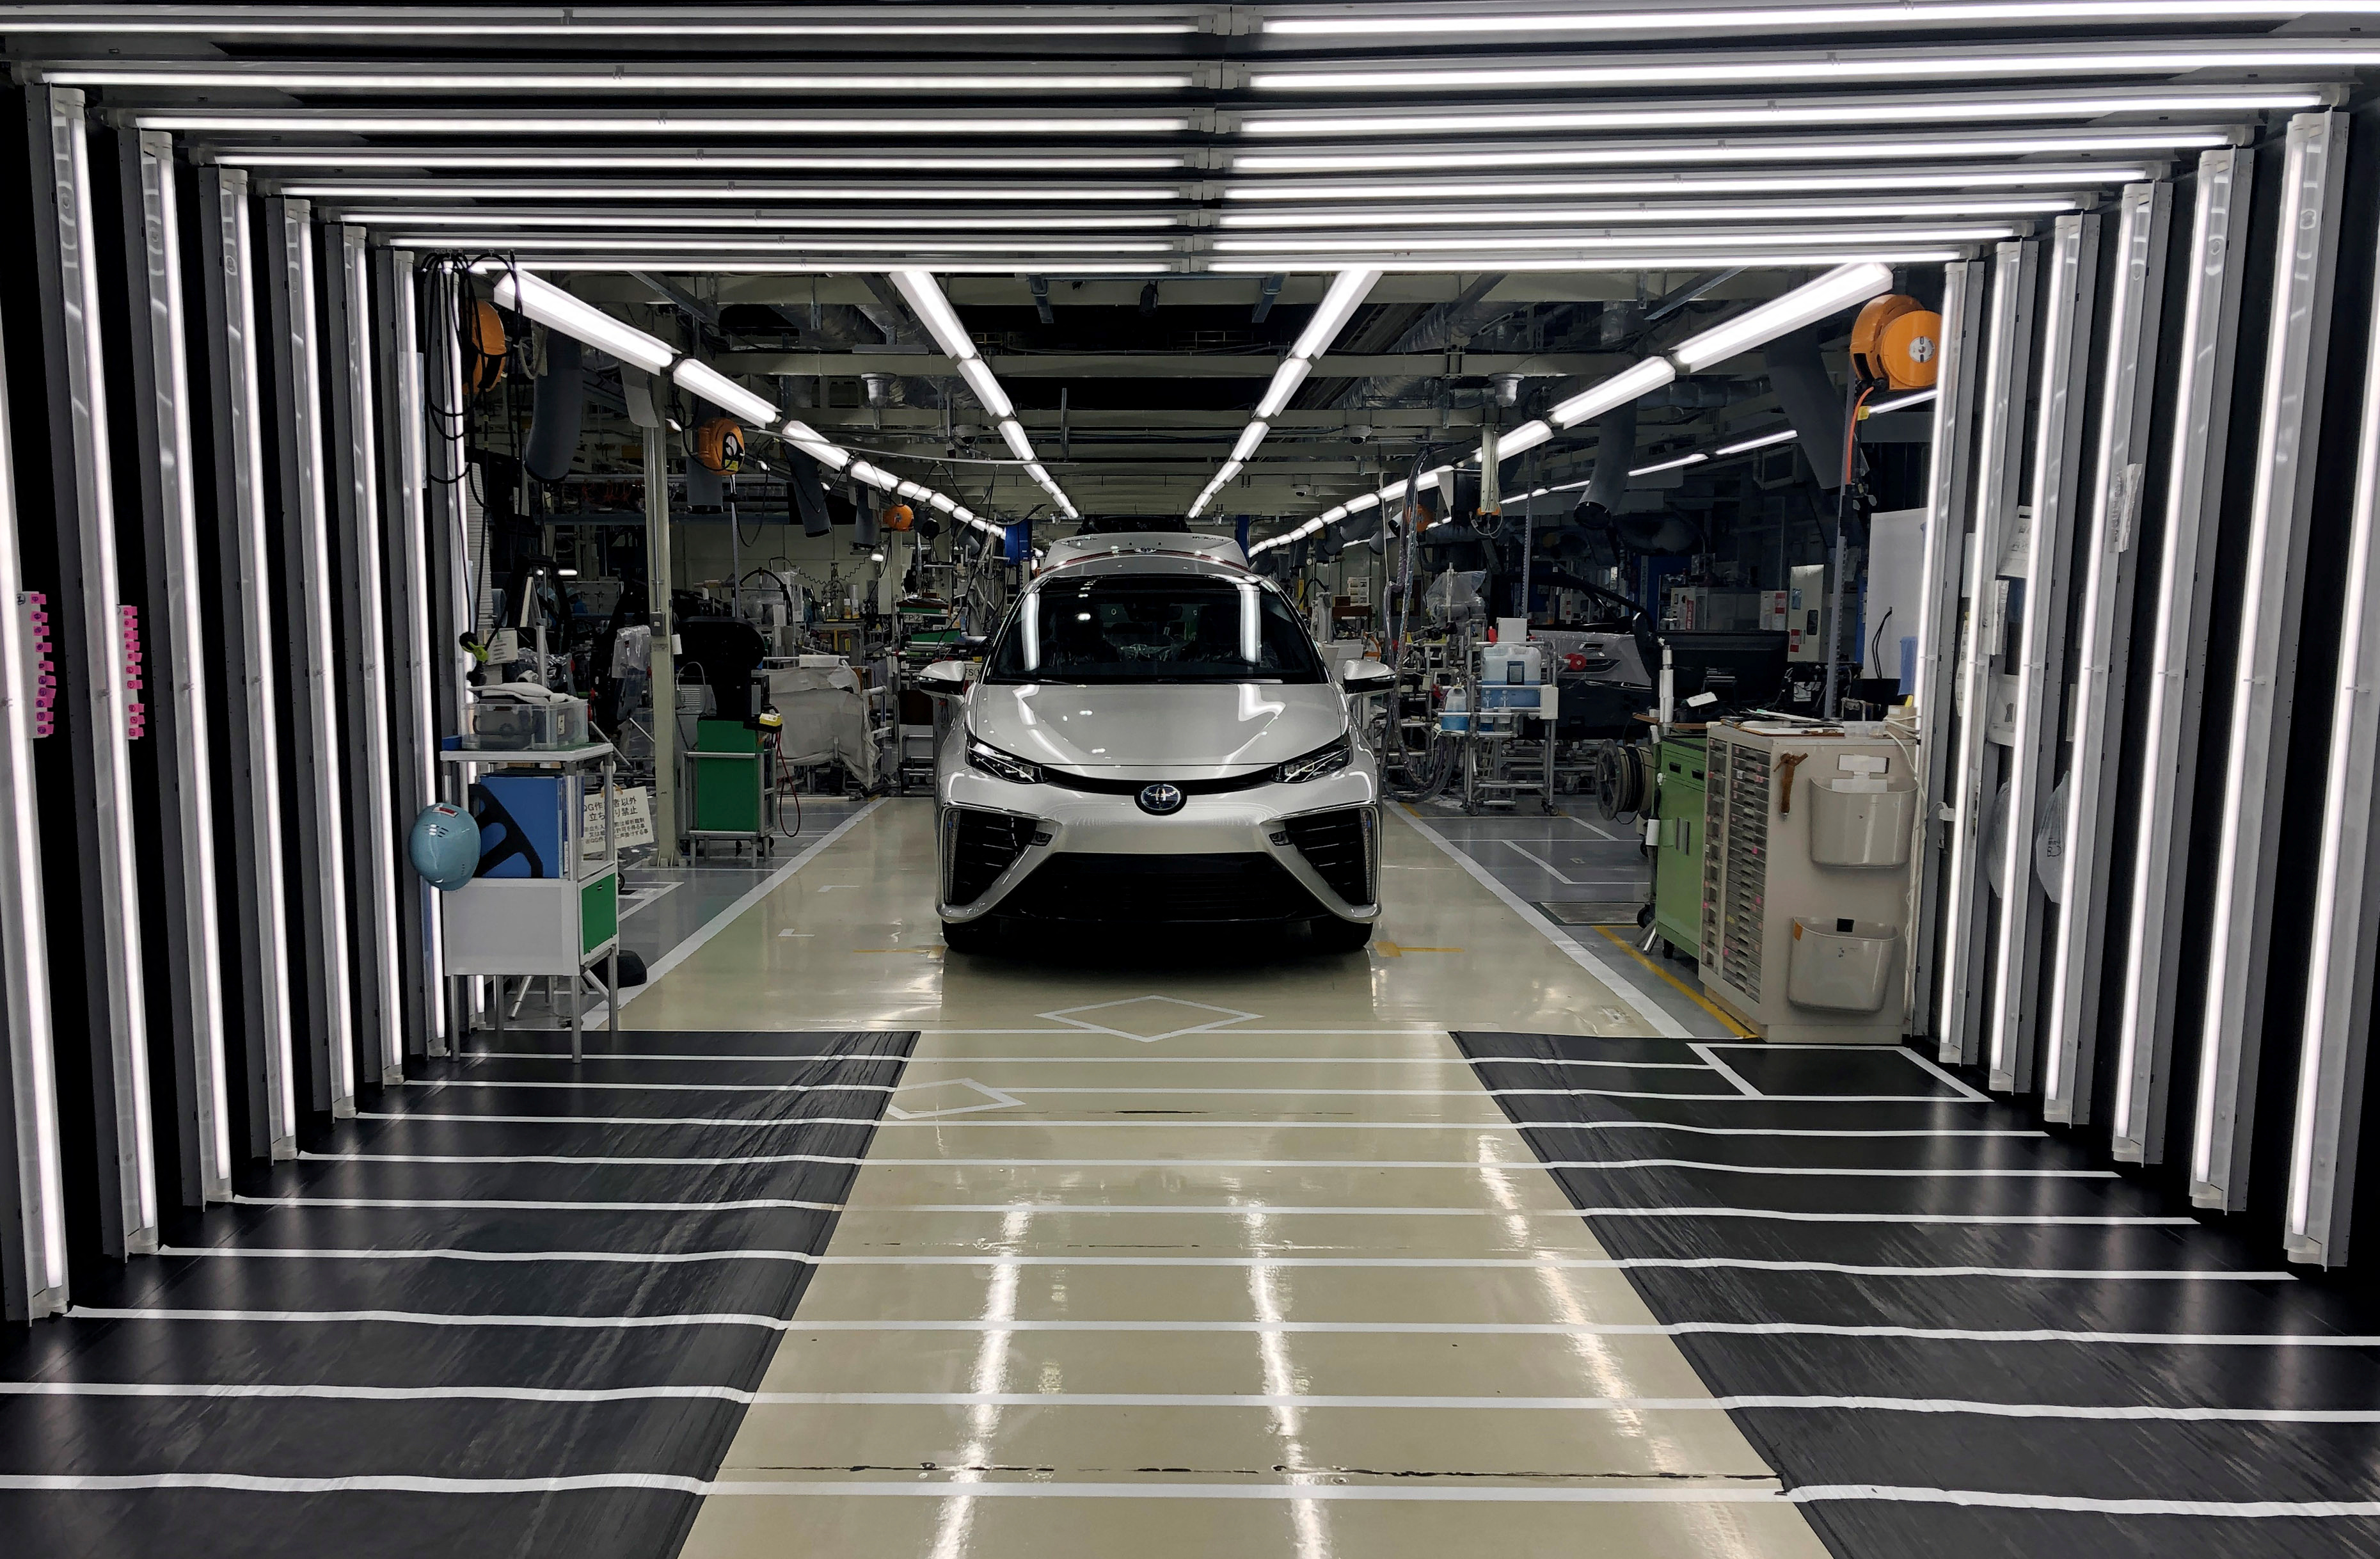 A Toyota Mirai fuel cell vehicle awaits final inspection at a Toyota Motor Corp. factory in Toyota